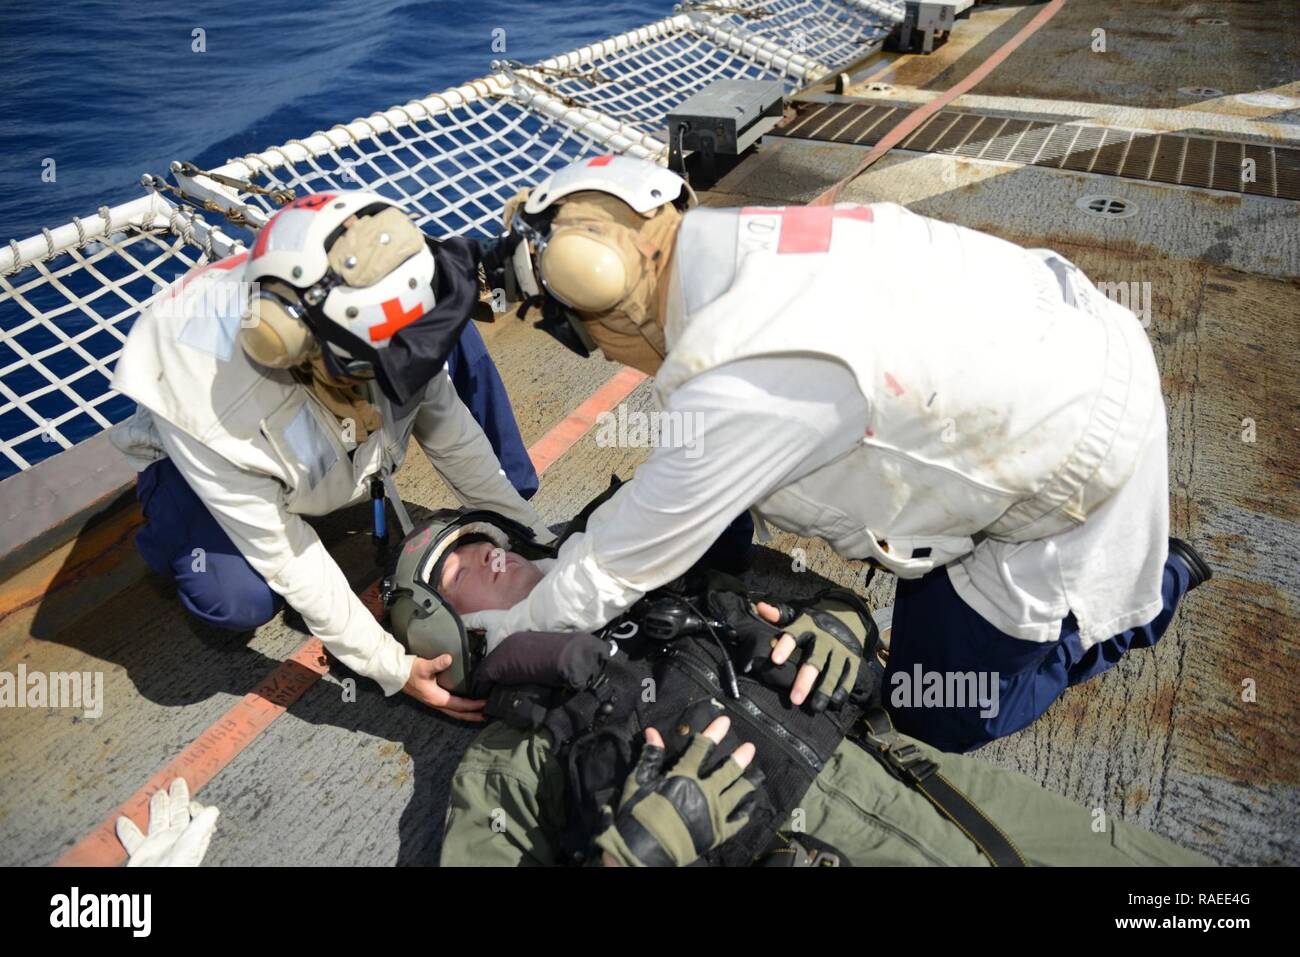 EASTERN PACIFIC OCEAN – Seaman Kristine Kearny (left), a crewmember aboard the Coast Guard Cutter Sherman, removes Lt. Sean O’Dowd’s helmet on Sherman’s flight deck during a helicopter-crash-on-deck drill, Jan. 19, 2017. The crew of Sherman is currently deployed in support of counter drug operations. Cutters like Sherman routinely conduct operations from South America to the Bering Sea conducting alien migrant interdiction operations, domestic fisheries protection, search and rescue, counter-narcotics and other Coast Guard missions at great distances from shore keeping threats far from the U.S Stock Photo